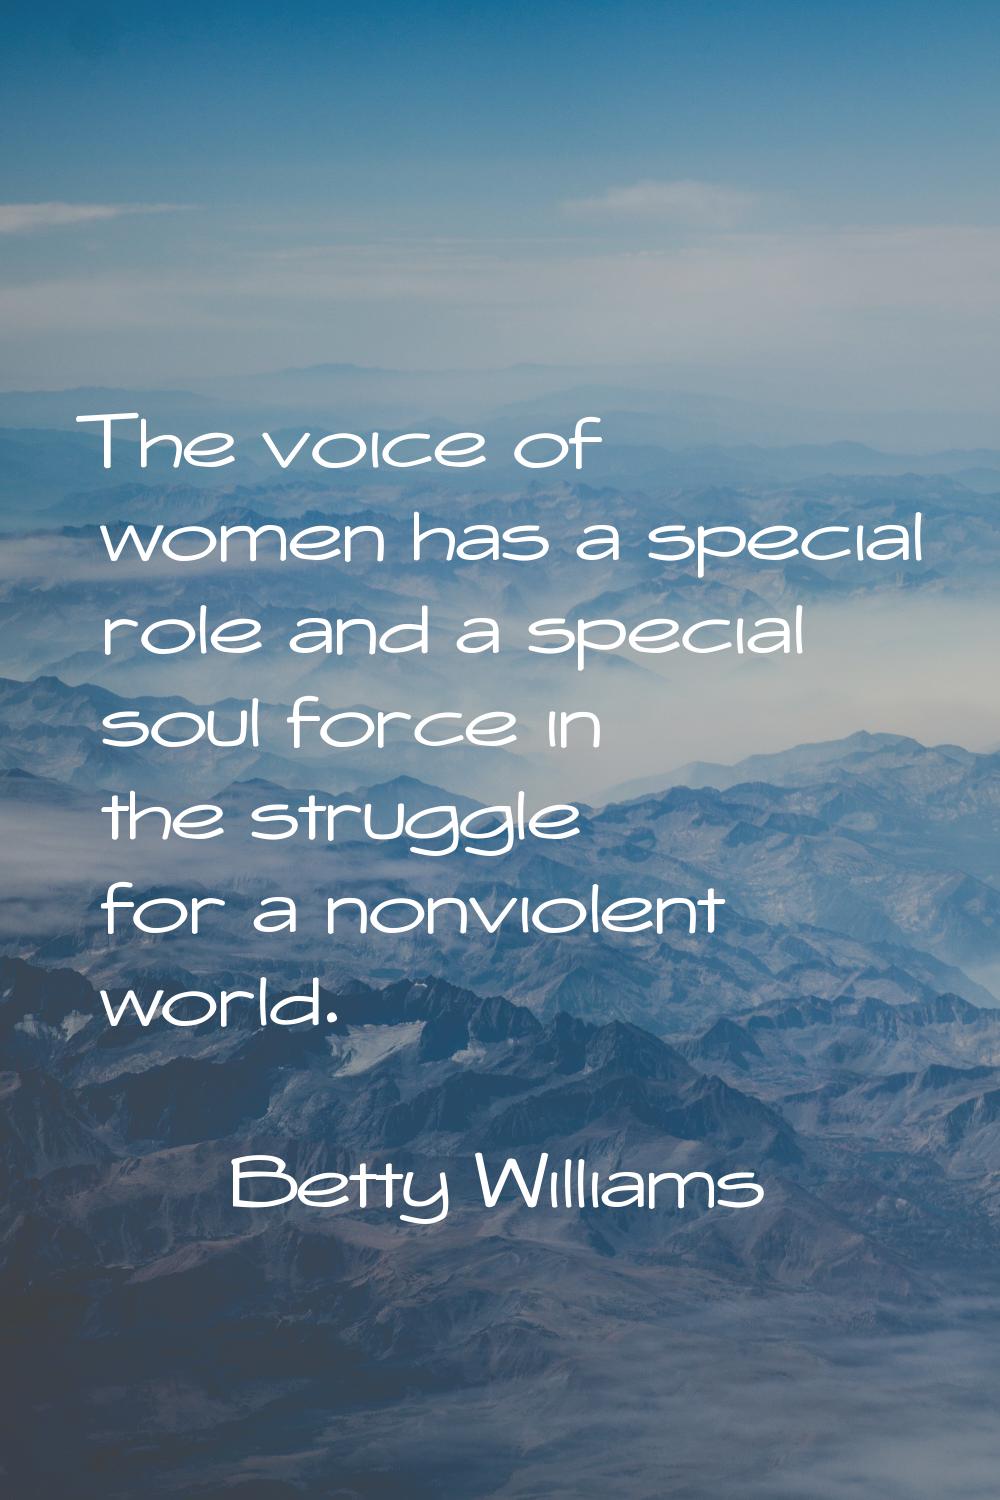 The voice of women has a special role and a special soul force in the struggle for a nonviolent wor